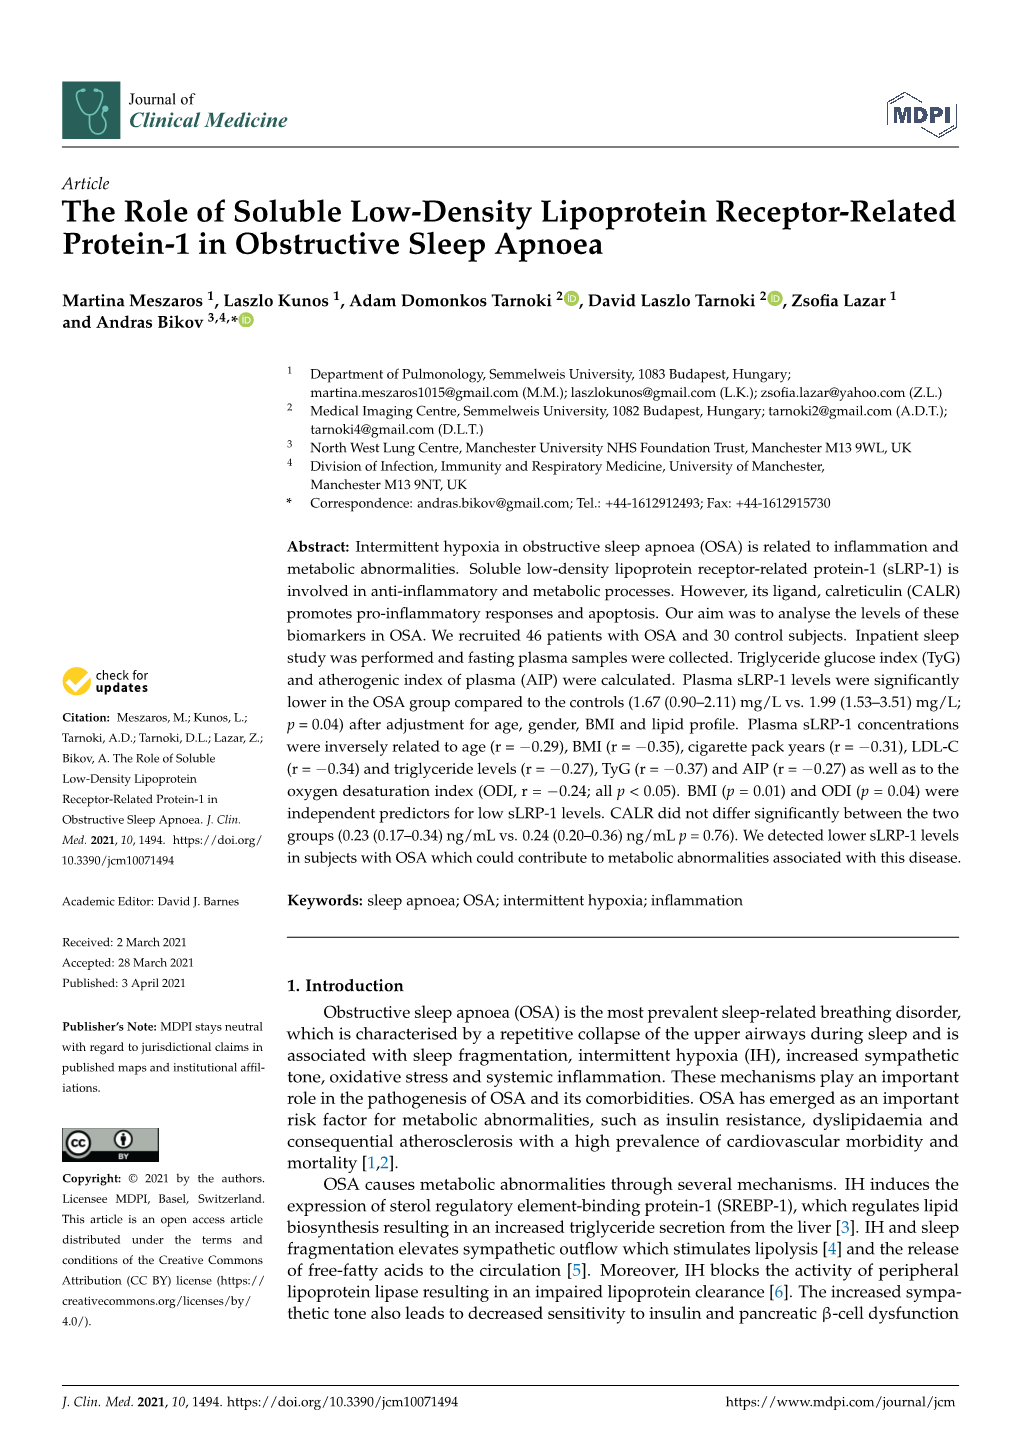 The Role of Soluble Low-Density Lipoprotein Receptor-Related Protein-1 in Obstructive Sleep Apnoea